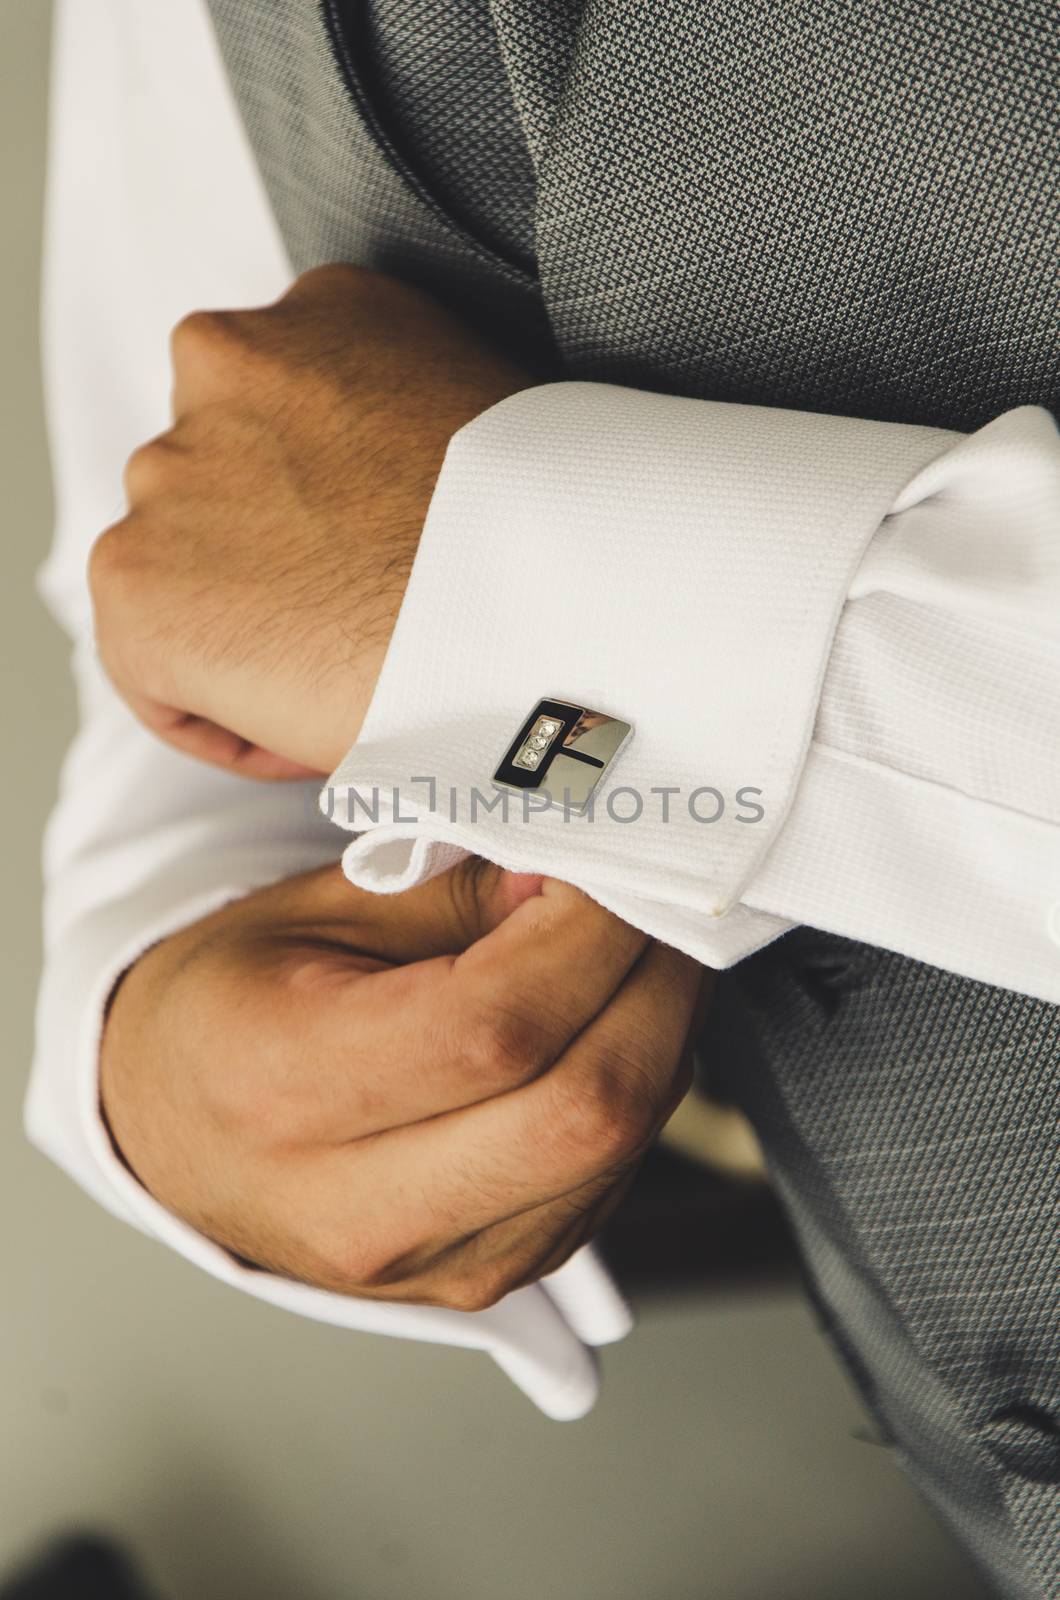 Wedding Suit for the groom